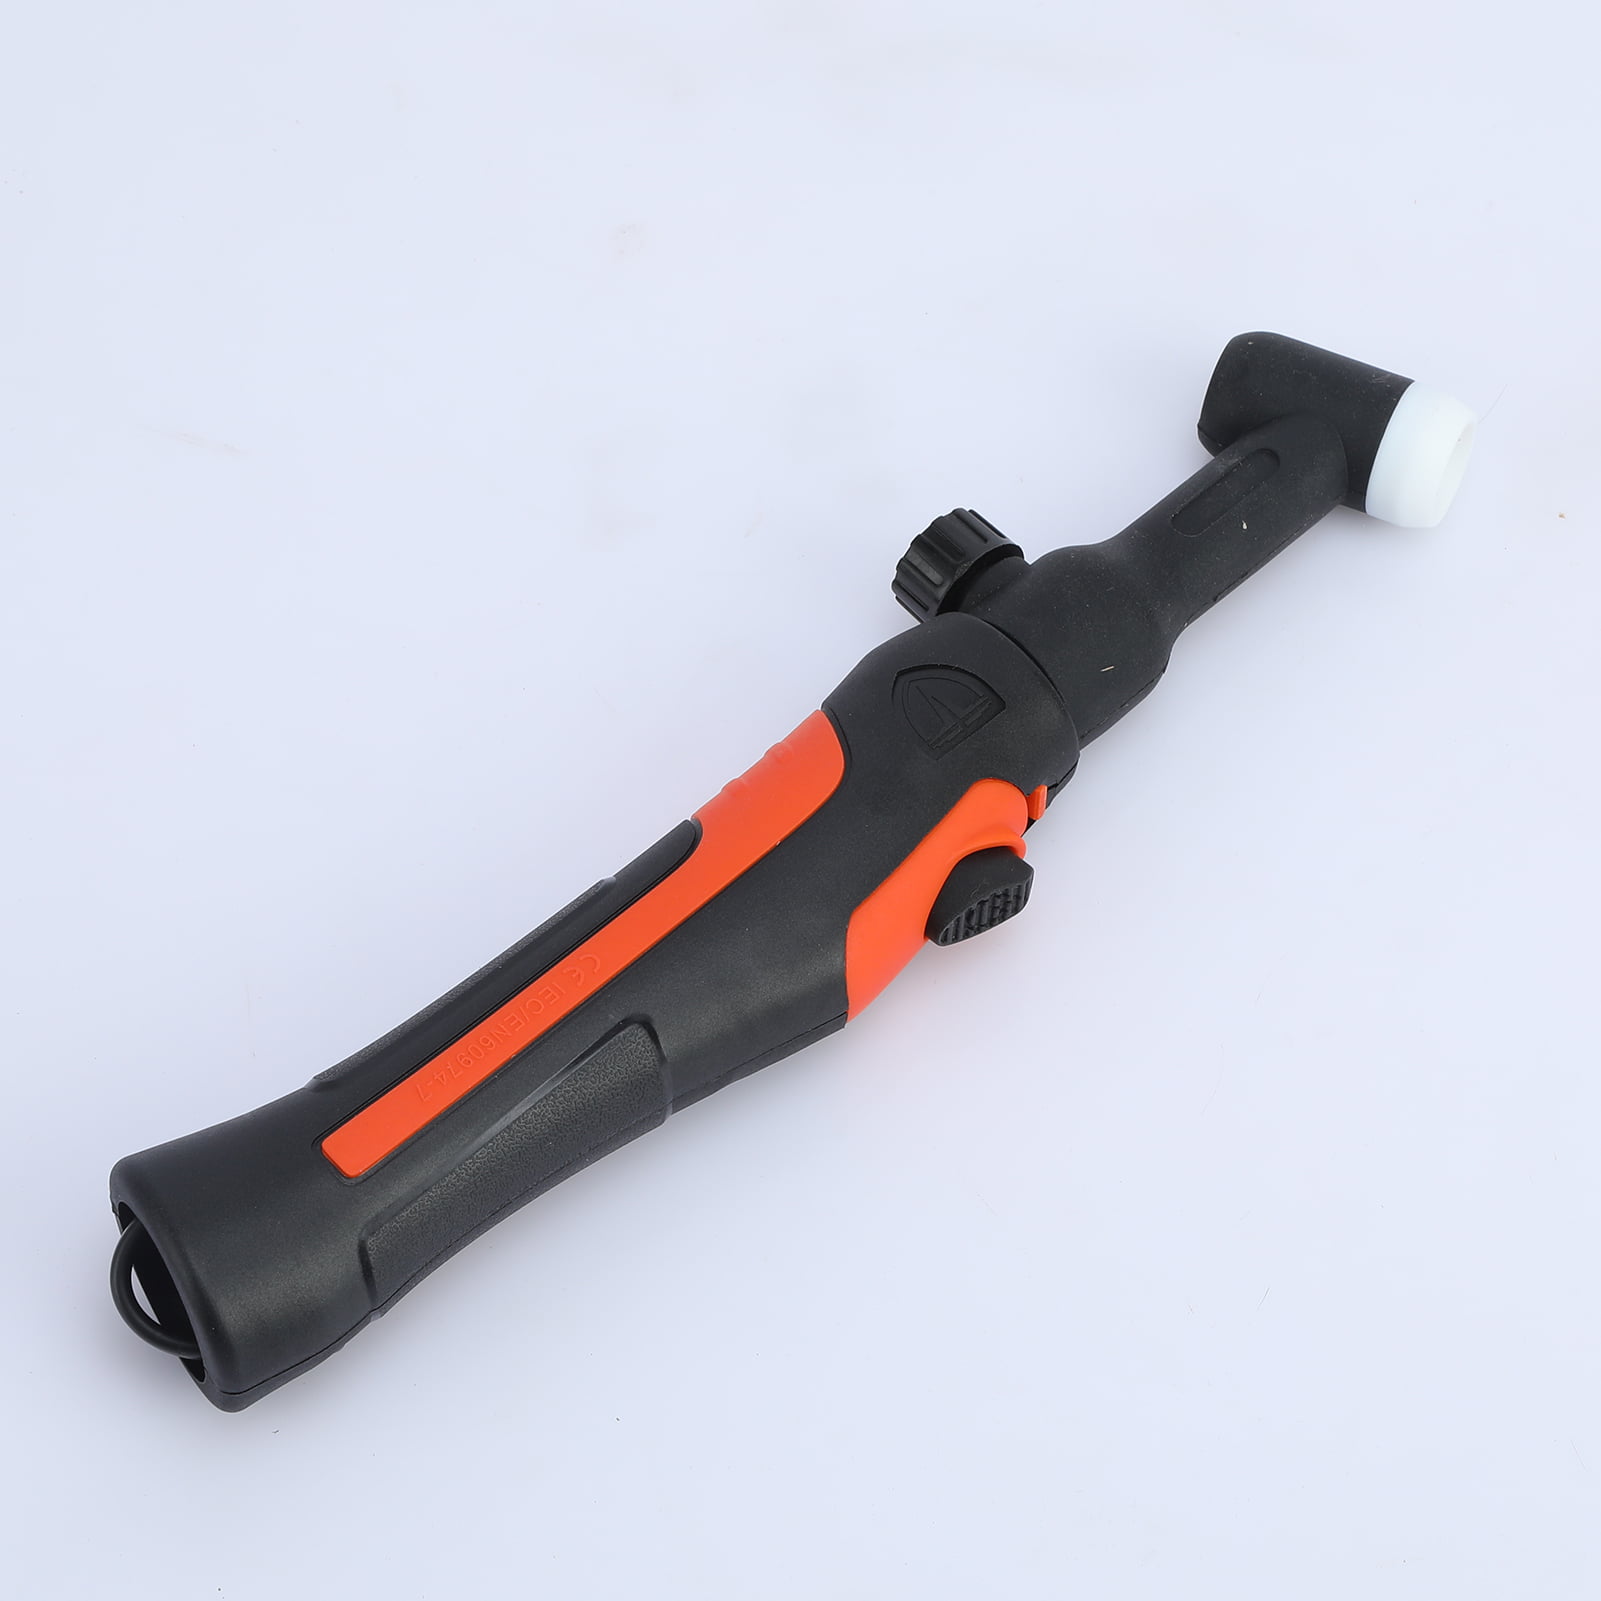 Welding Torch Handle-a Portable Welding Torch Handle That Can Be Controlled with One Hand and Is Comfortable To Hold TIG-26VF 